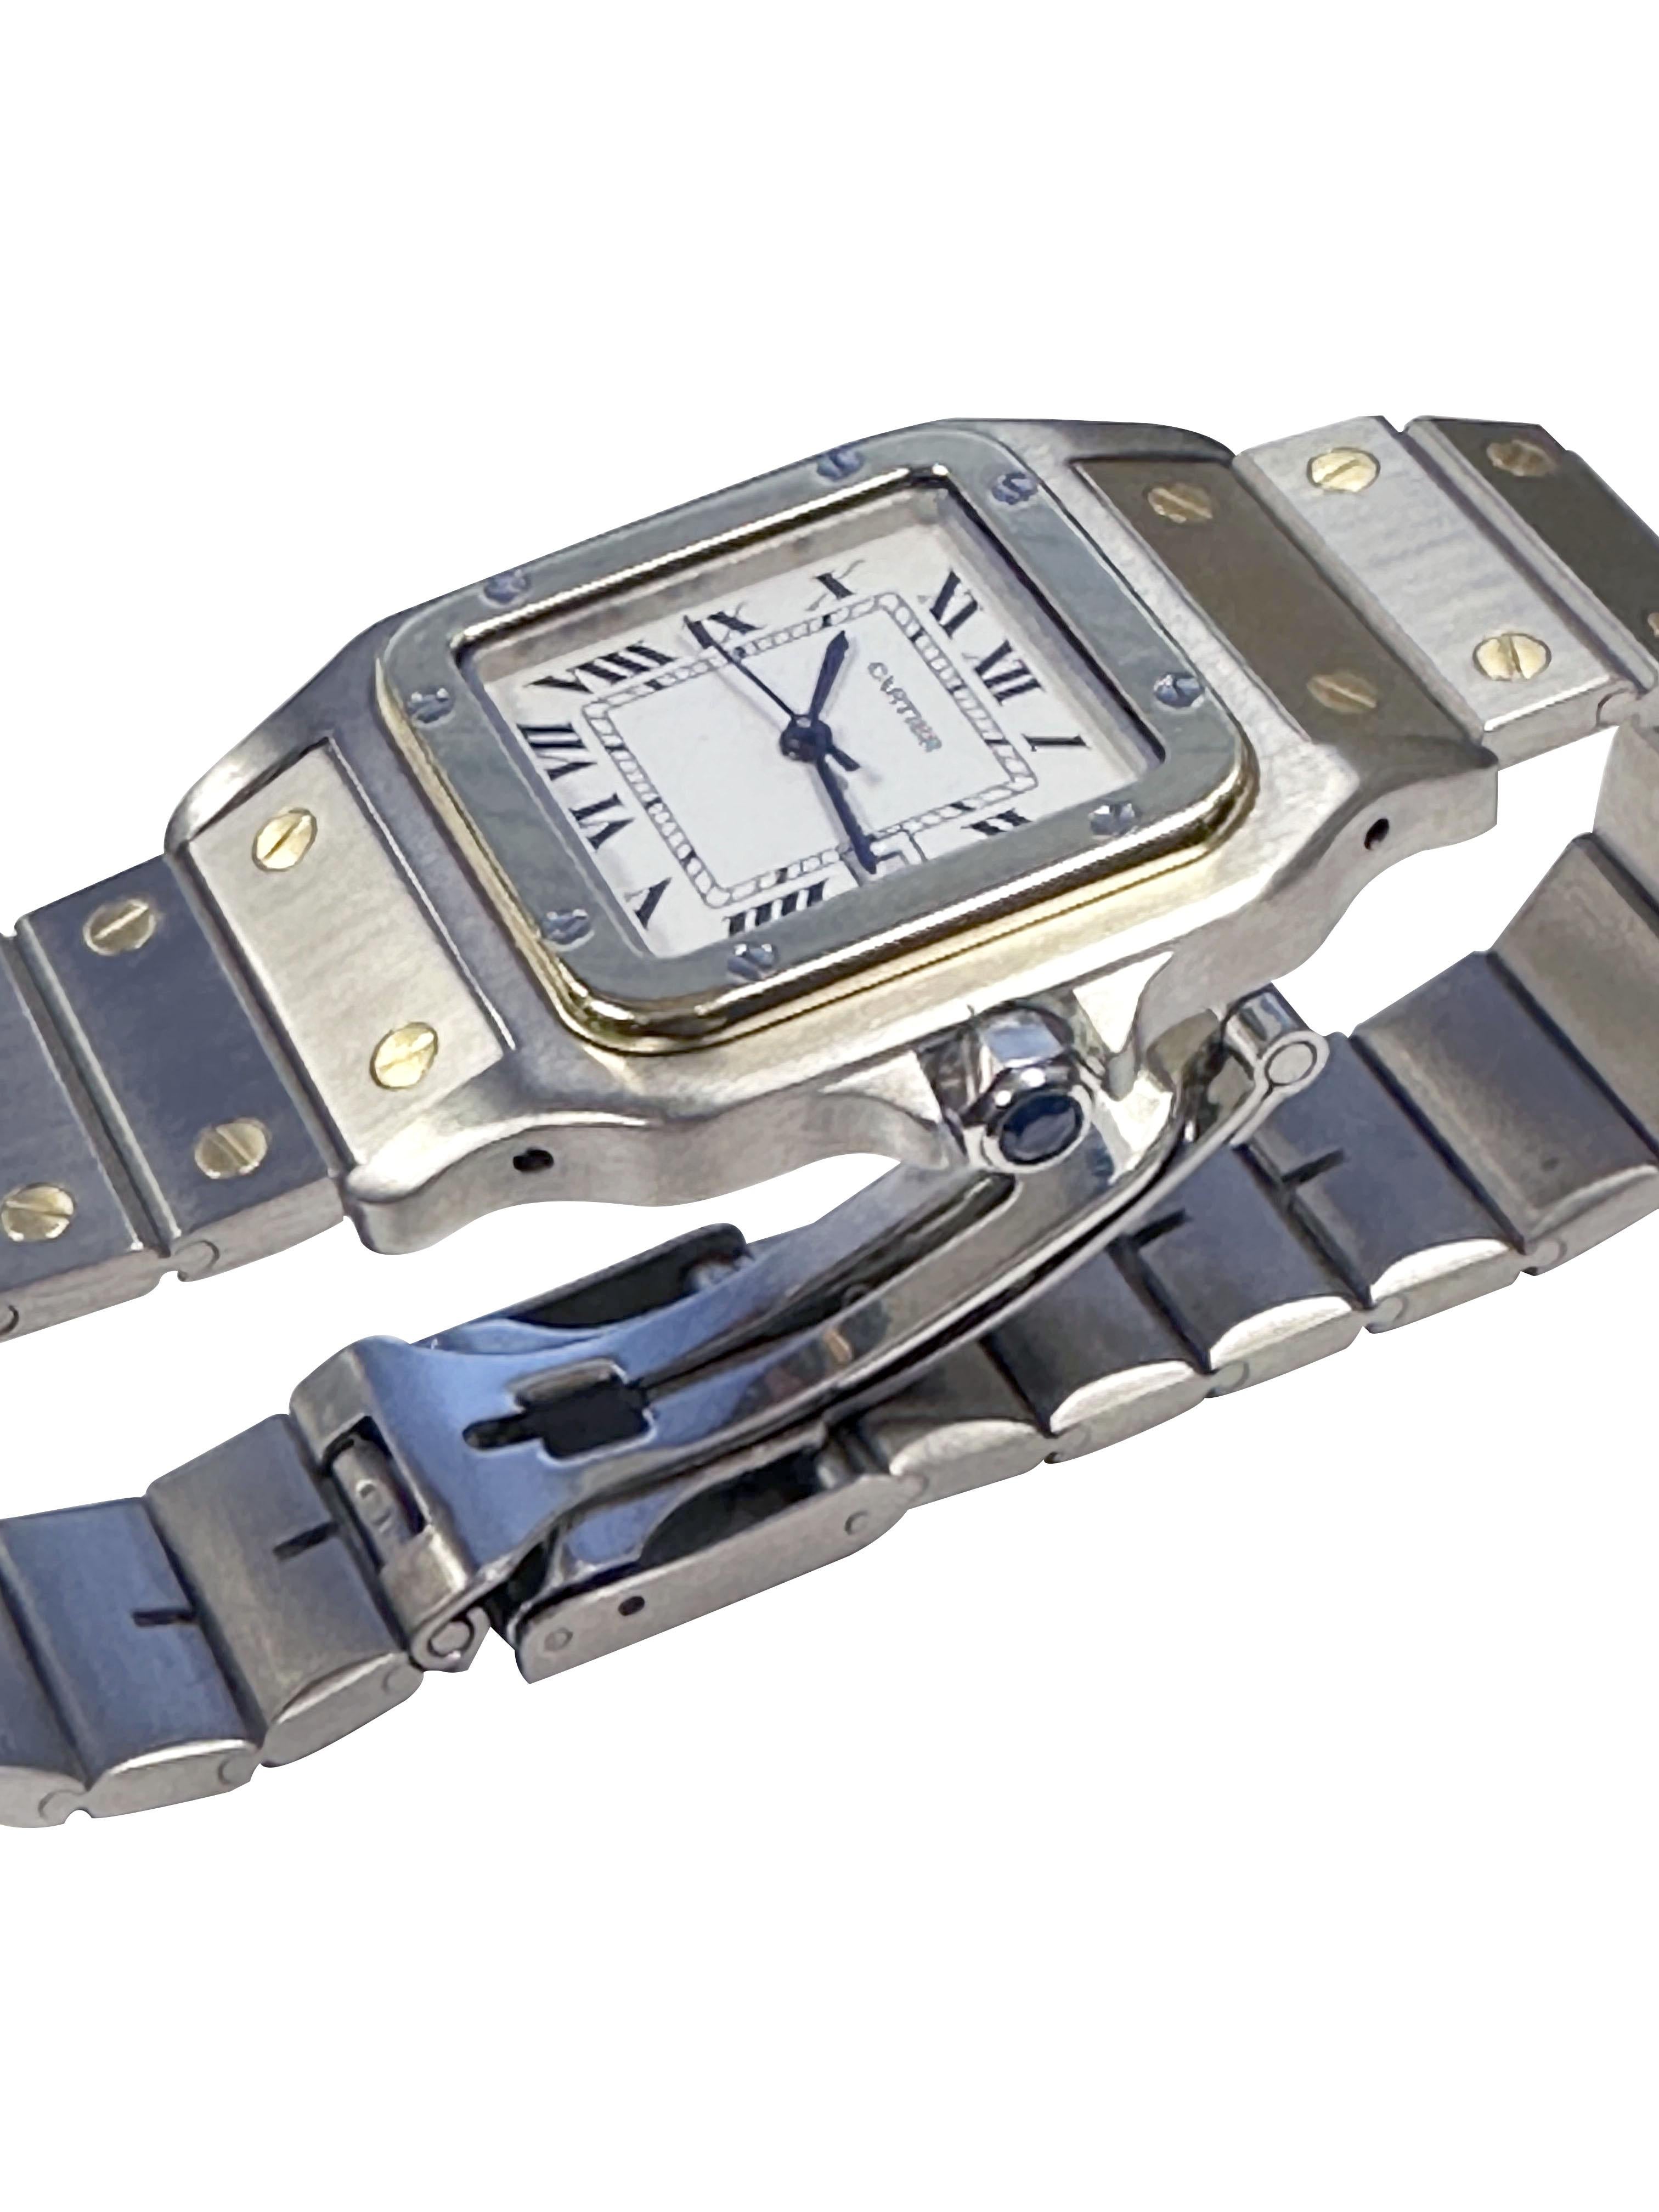 Circa 2000 Cartier Santos Gold and Steel Wrist Watch 29 x 27 M.M Stainless Steel case with 18K Yellow Gold Bezel and a Sapphire Crown, Automatic Self winding Movement, White Dial with Black Roman Numerals a Calendar window at the 3 position, sweep